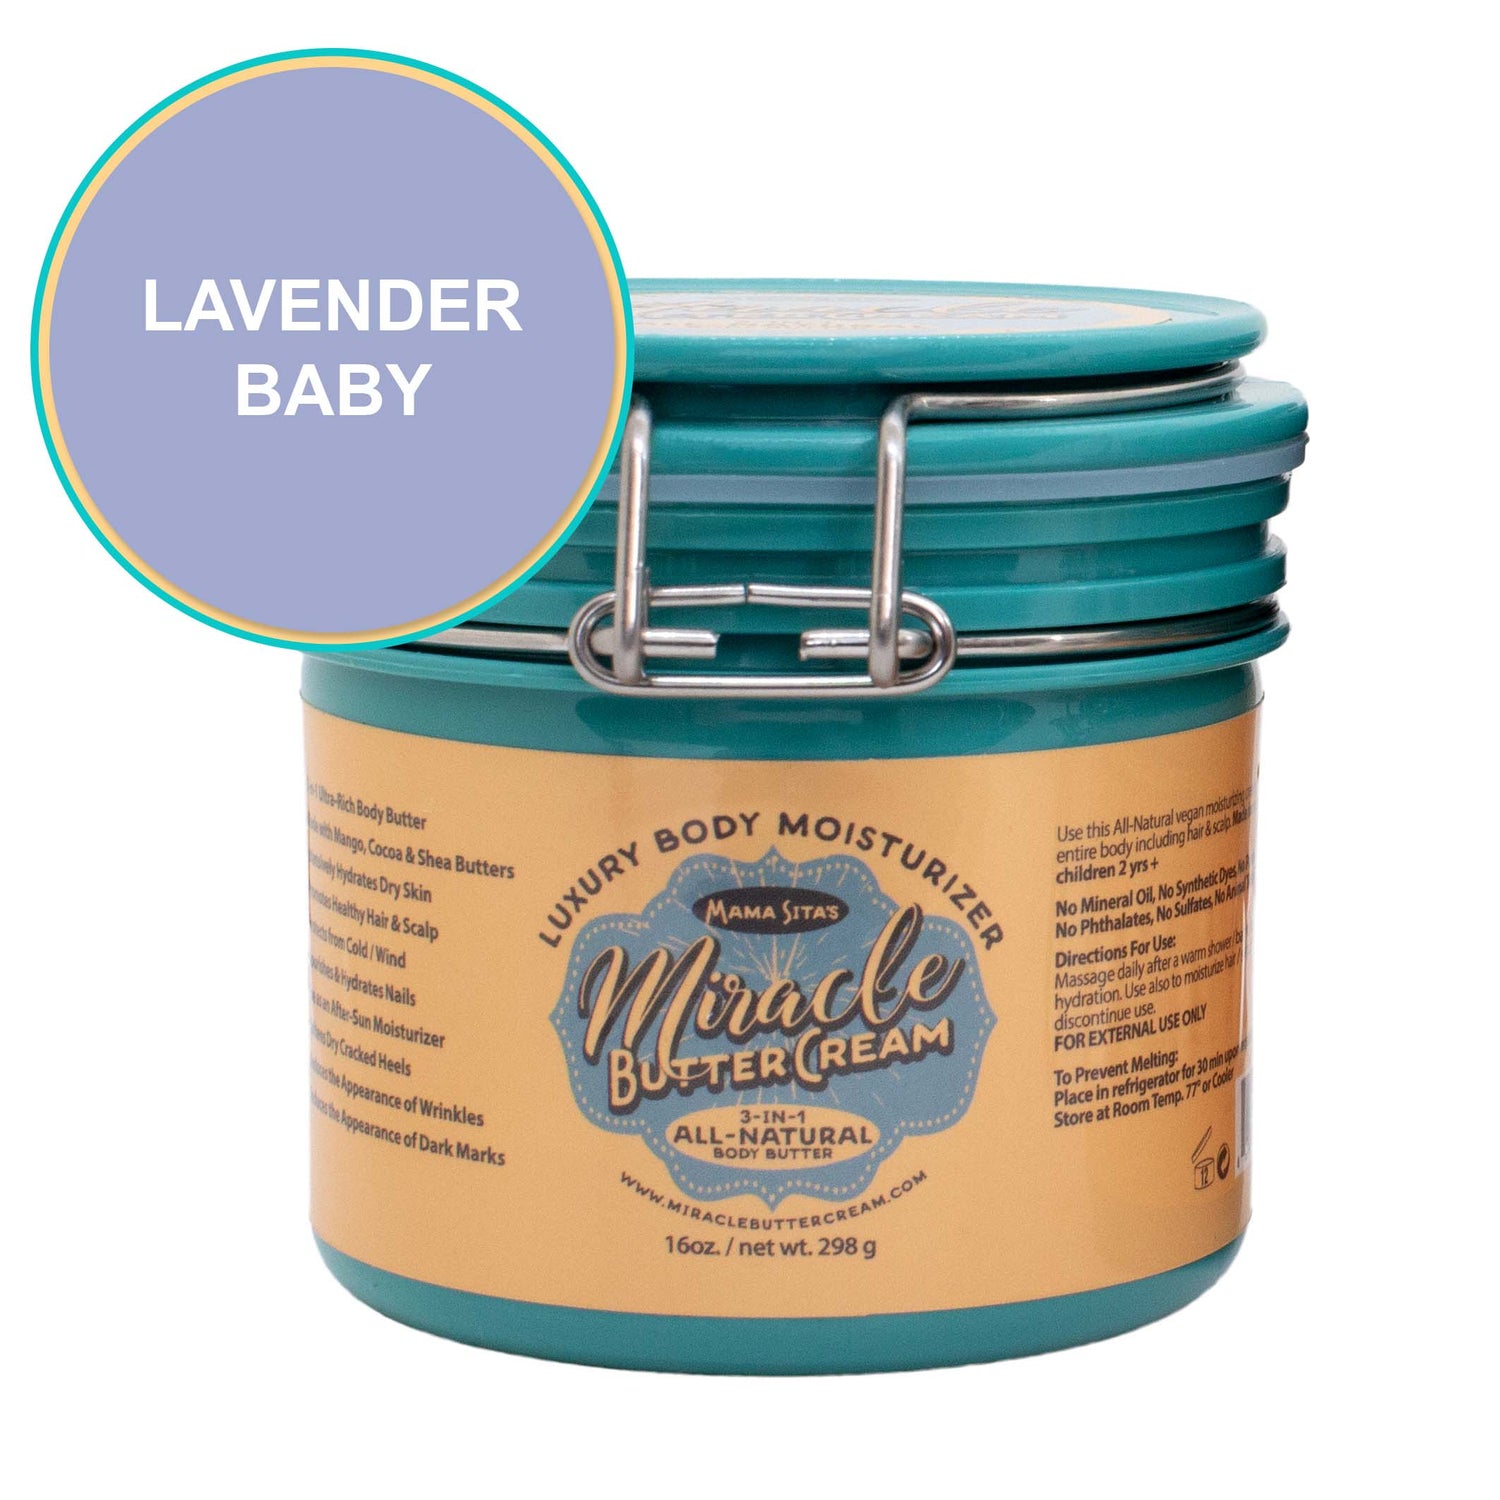 Lavender Baby Miracle Butter Cream 16 oz. miraclebuttercream.com